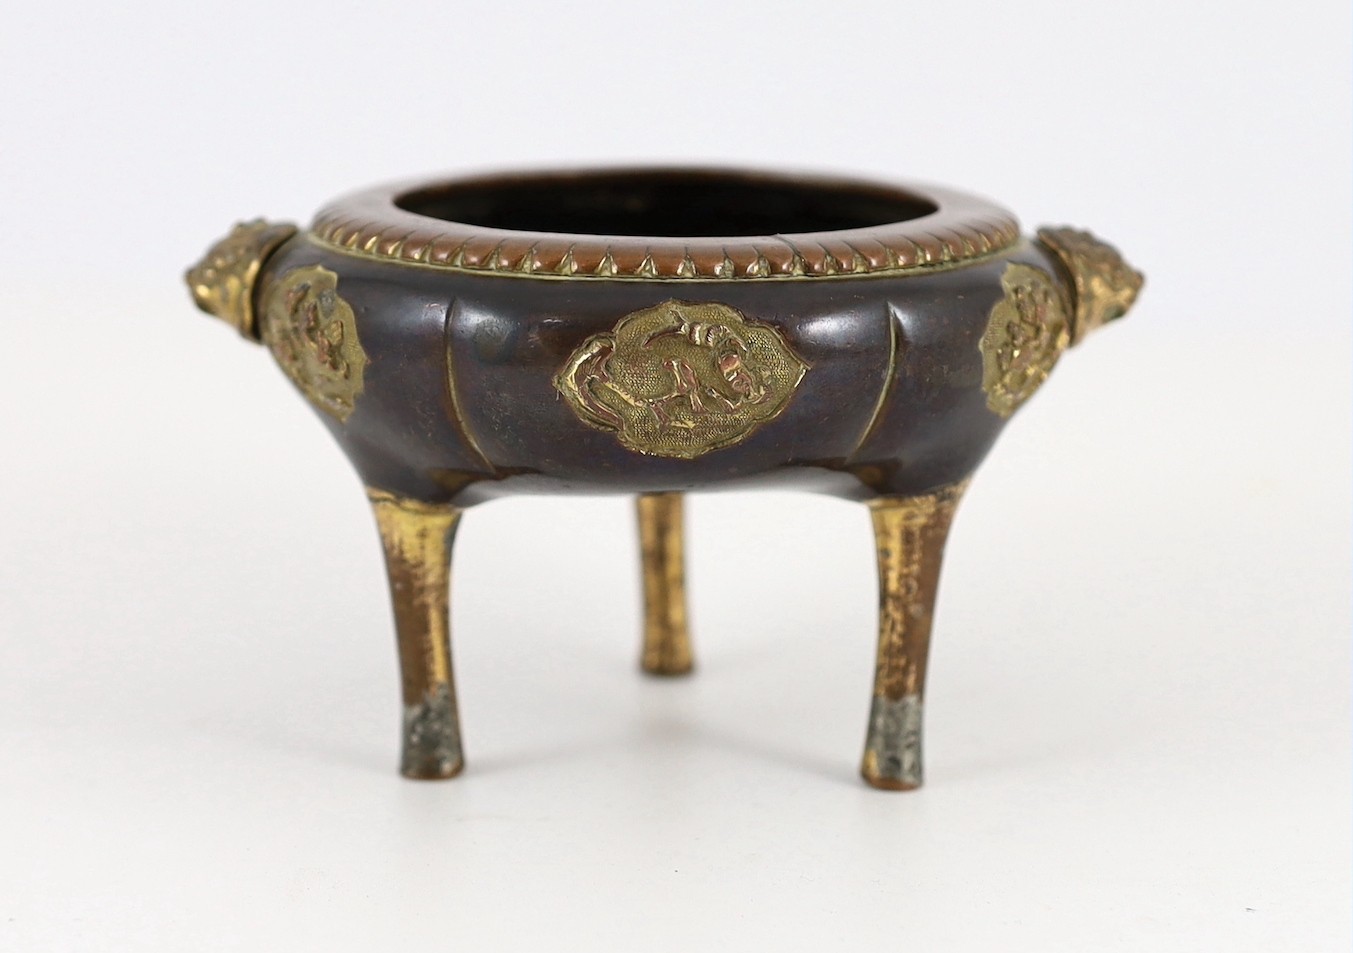 A Chinese Imperial copper alloy censer, ding, 18th century, 12cm wide 7cm high, ring handles and cover lacking, some wear.